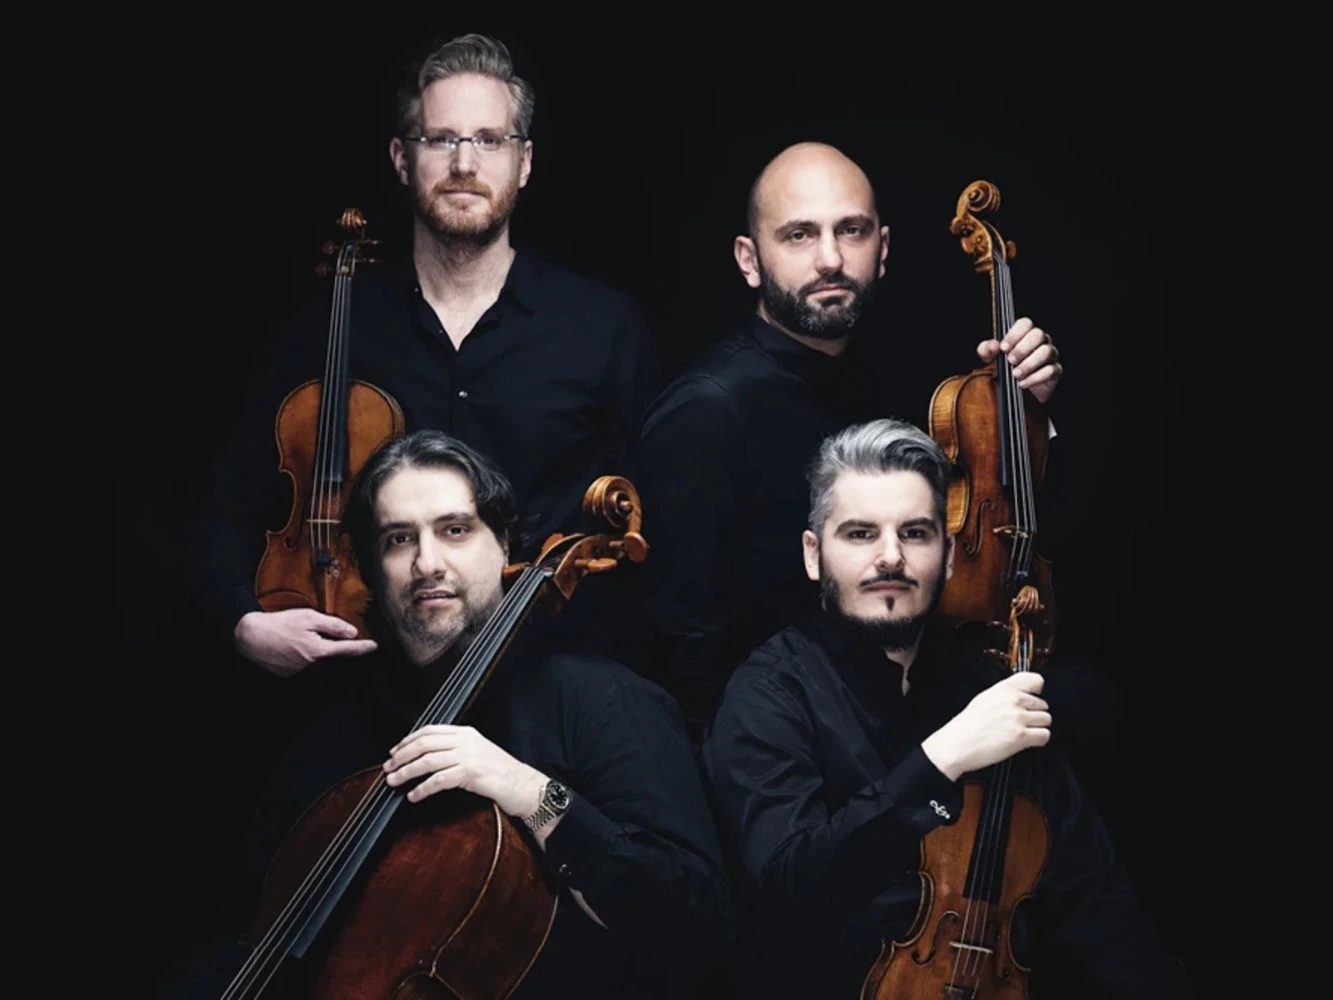 The Chamber Music Society of Lincoln Center: Quartetto di Cremona: What to expect - 1